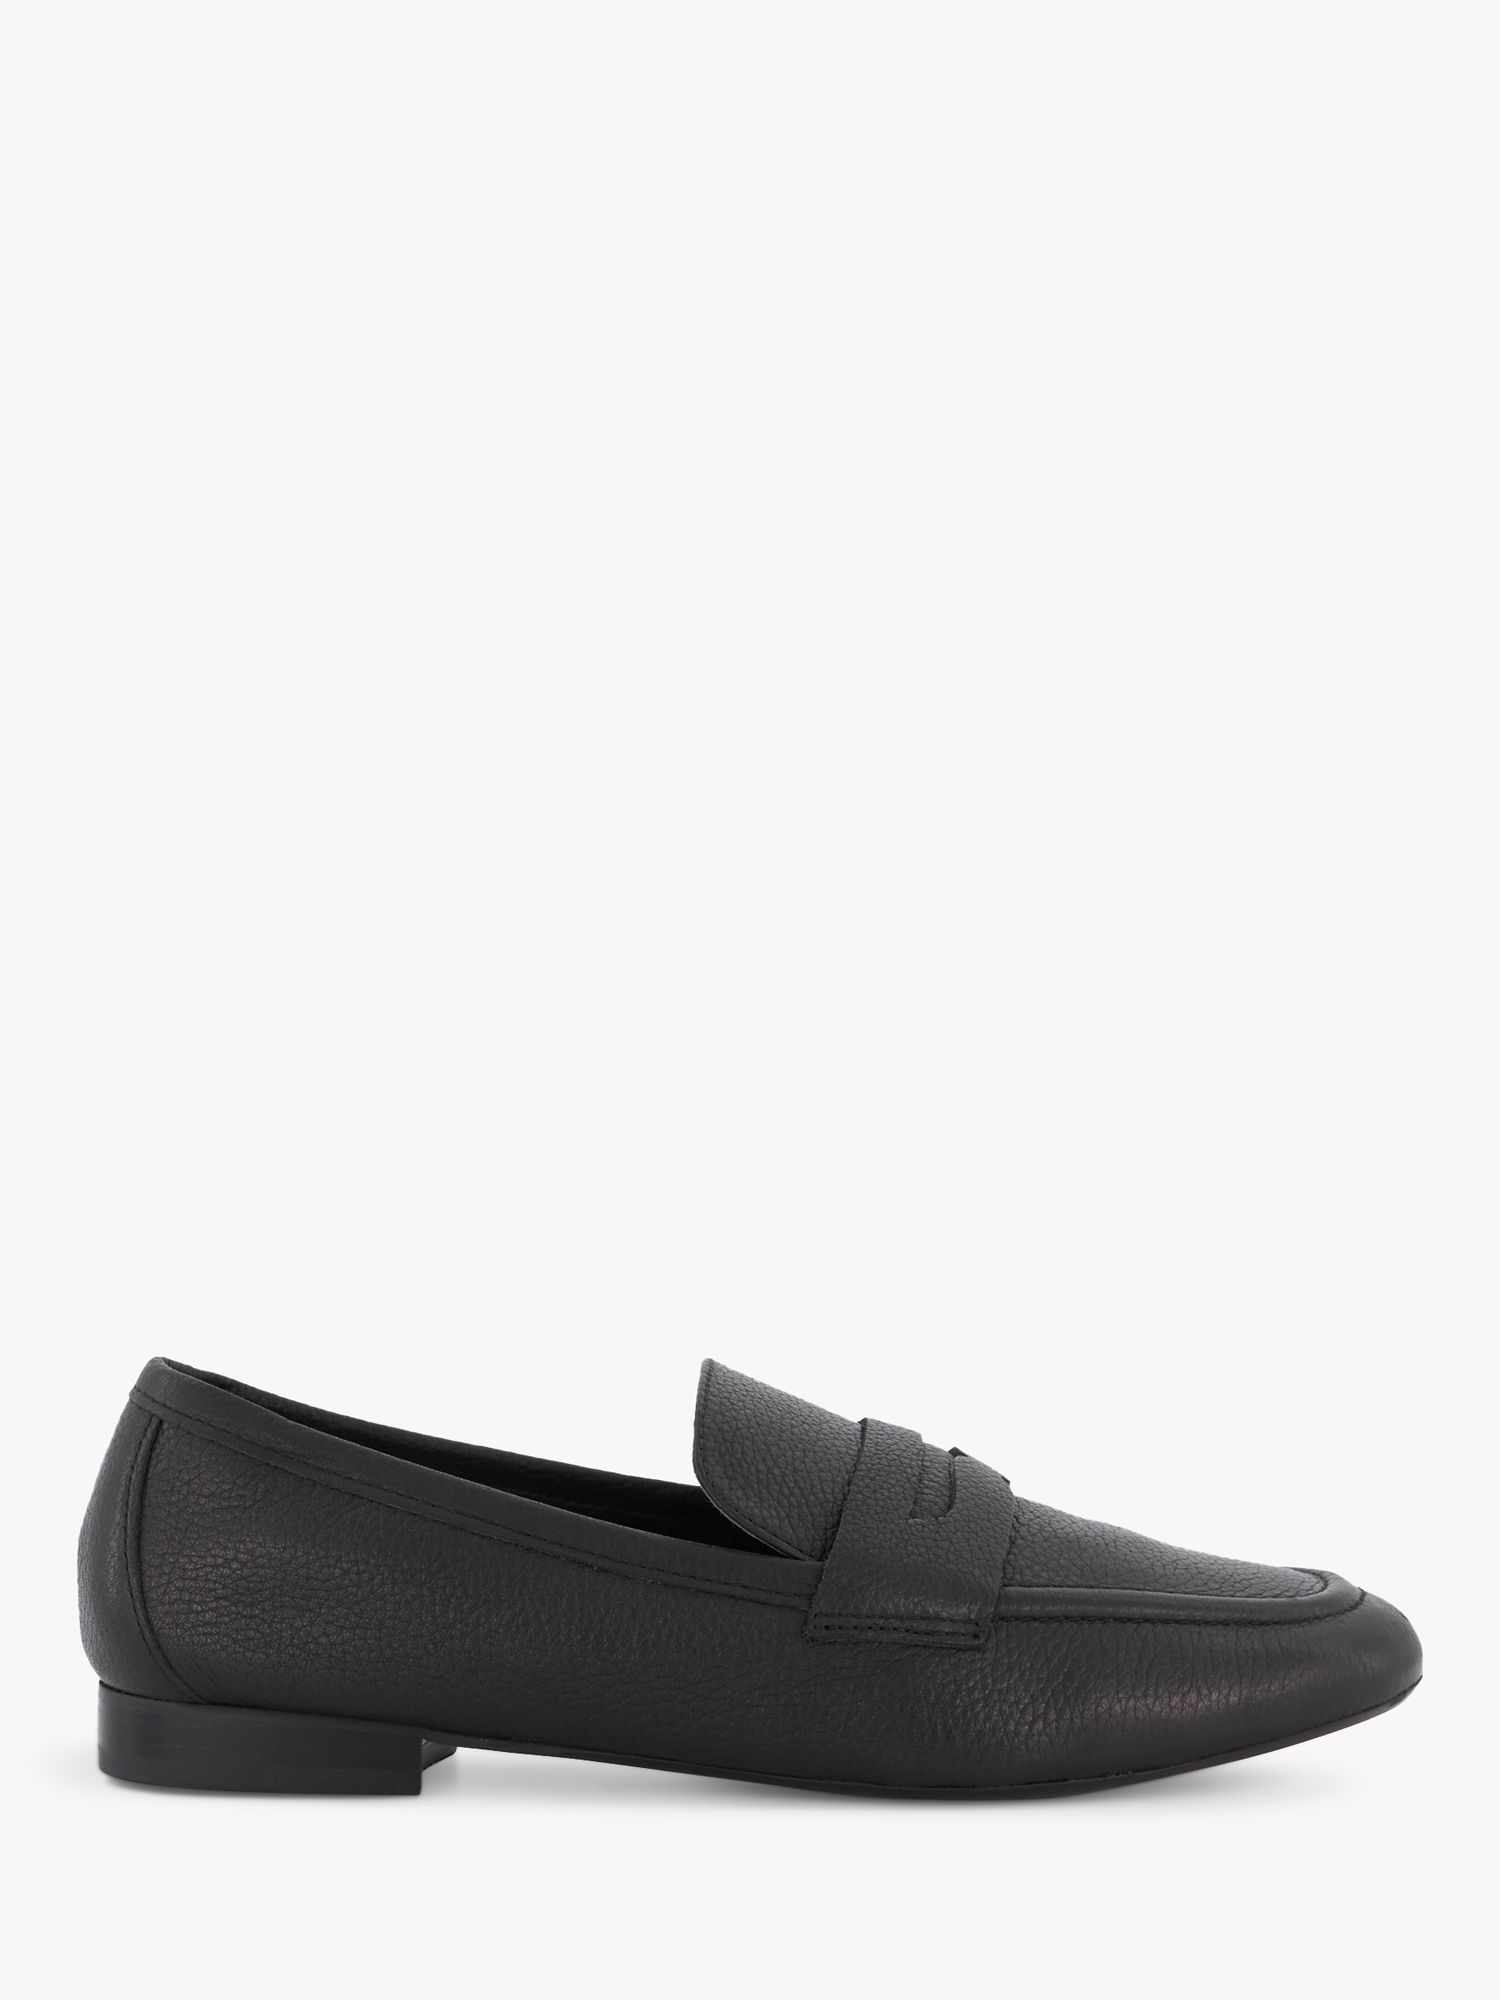 Dune Gianetta Leather Flat Penny Loafers, Black at John Lewis & Partners